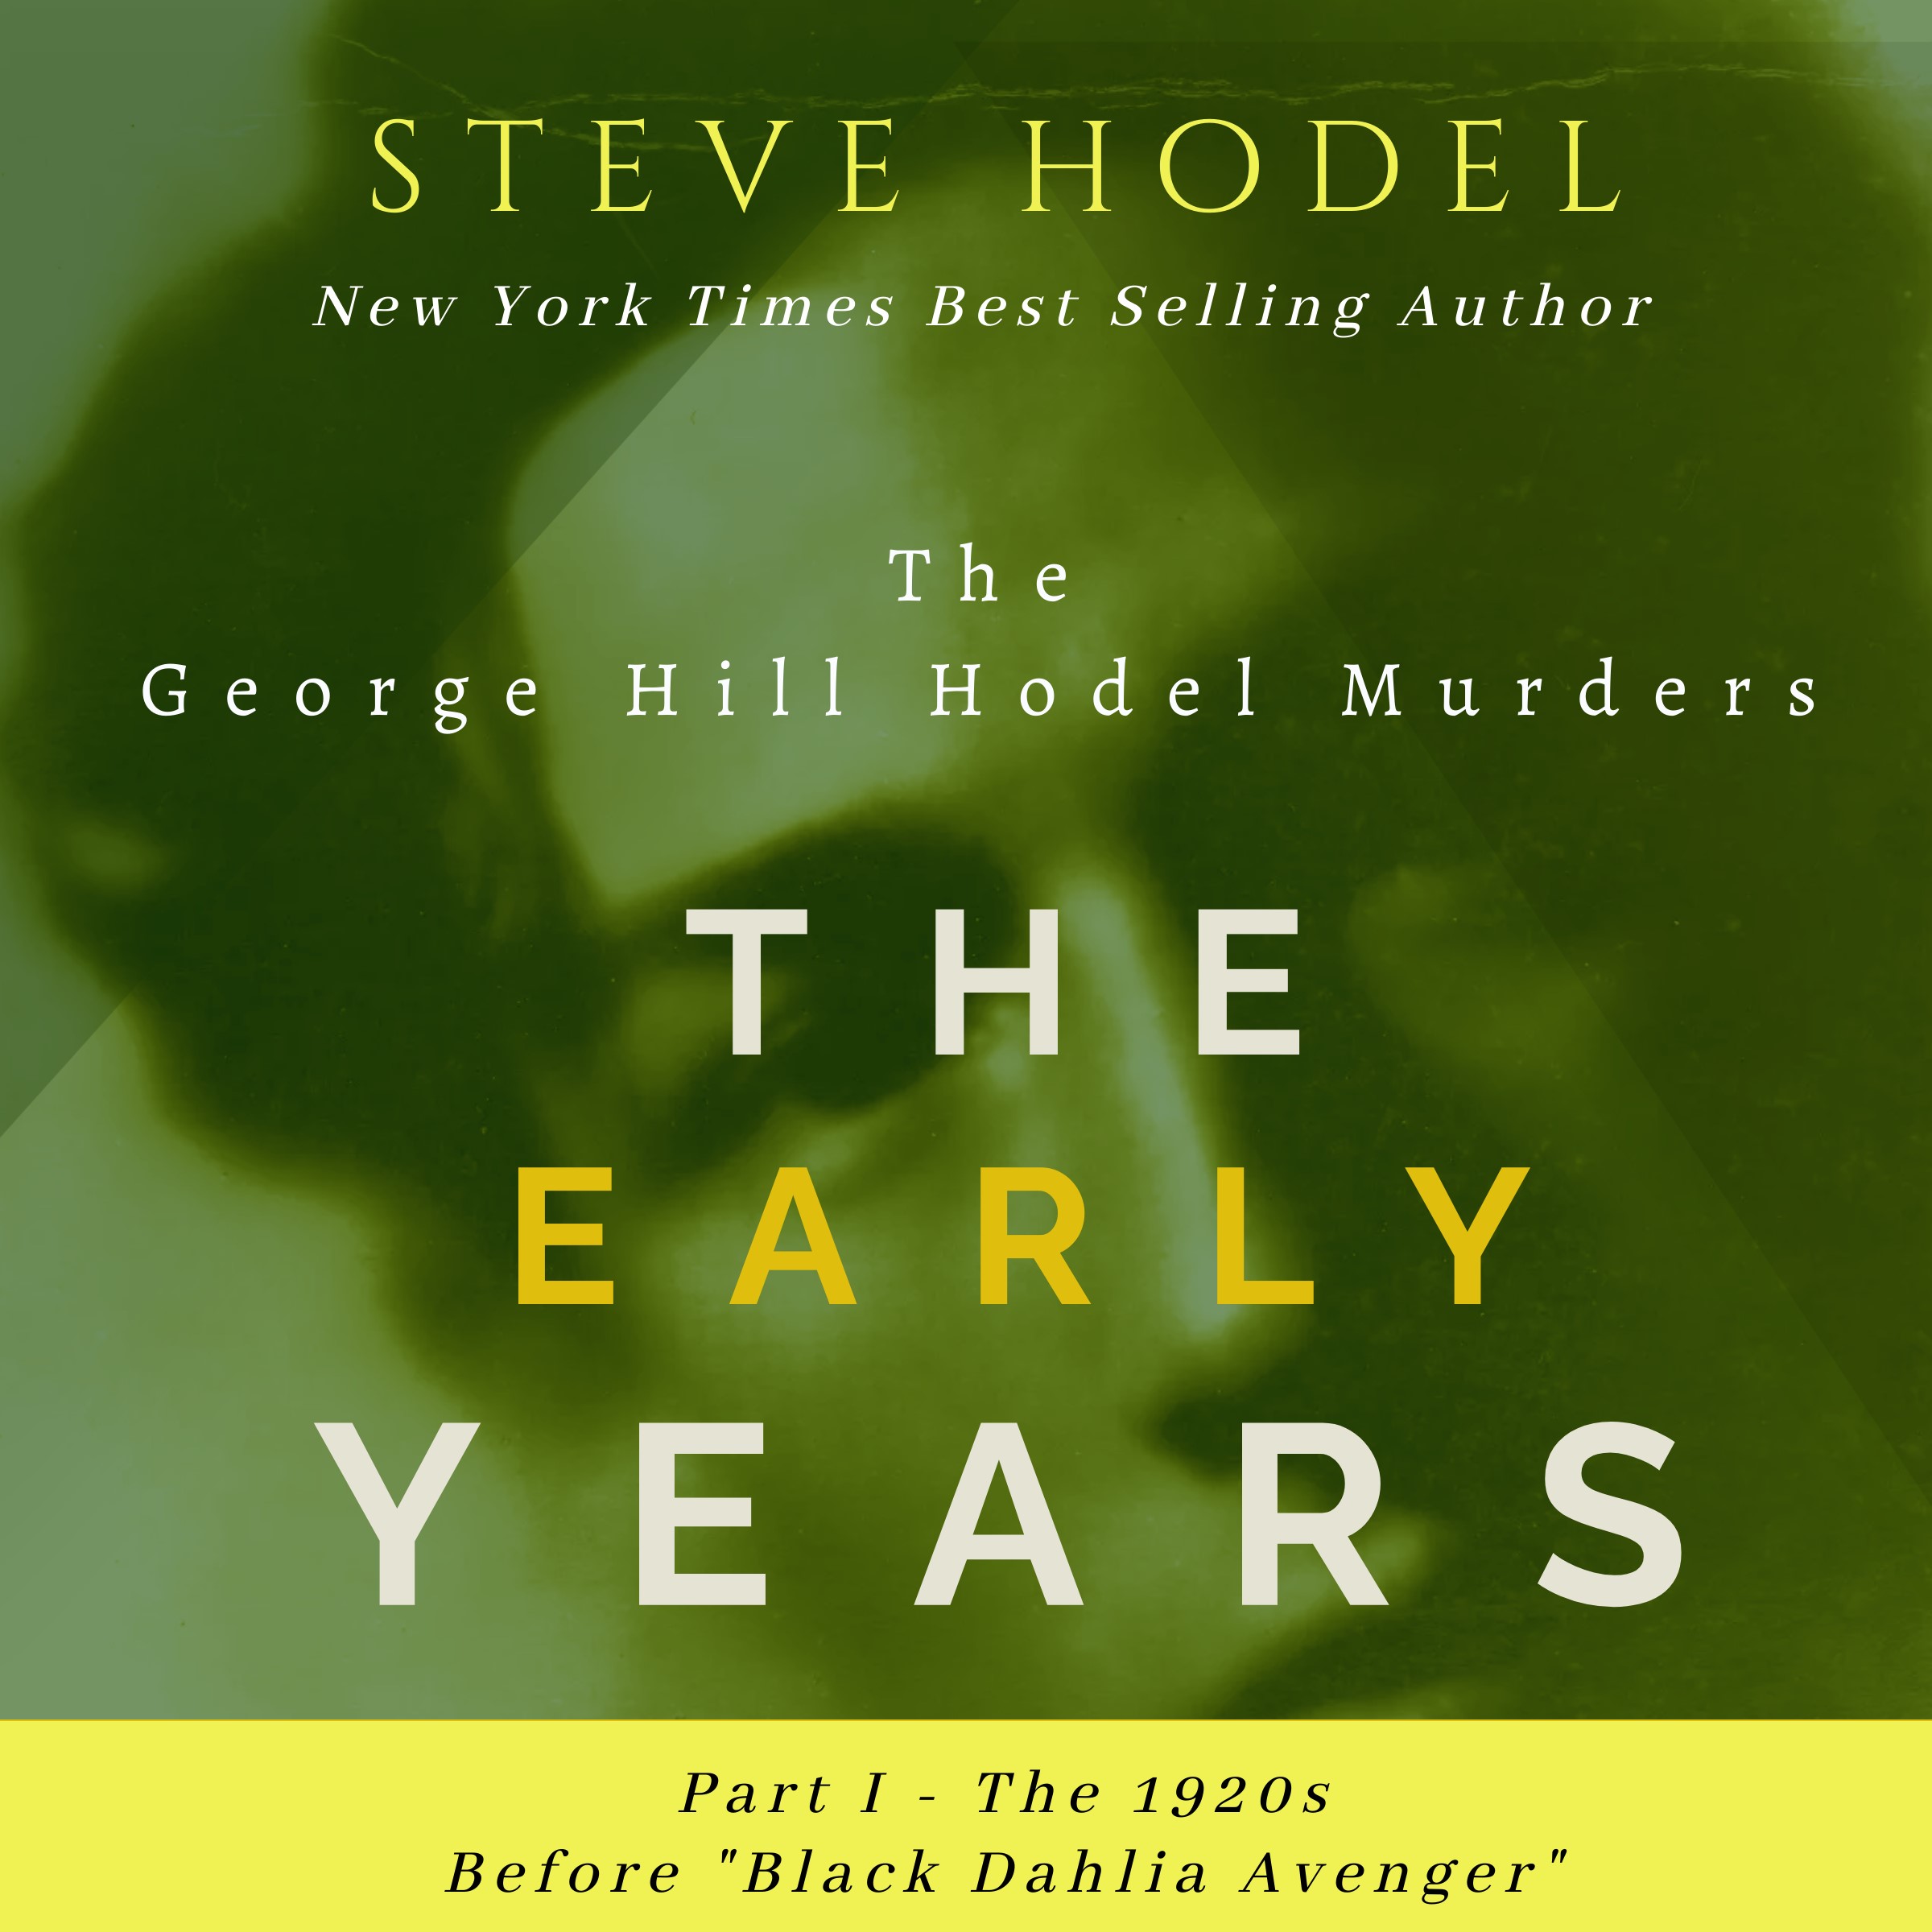 image for The Early Years Part I The. 1920s - The George Hill Hodel Murders